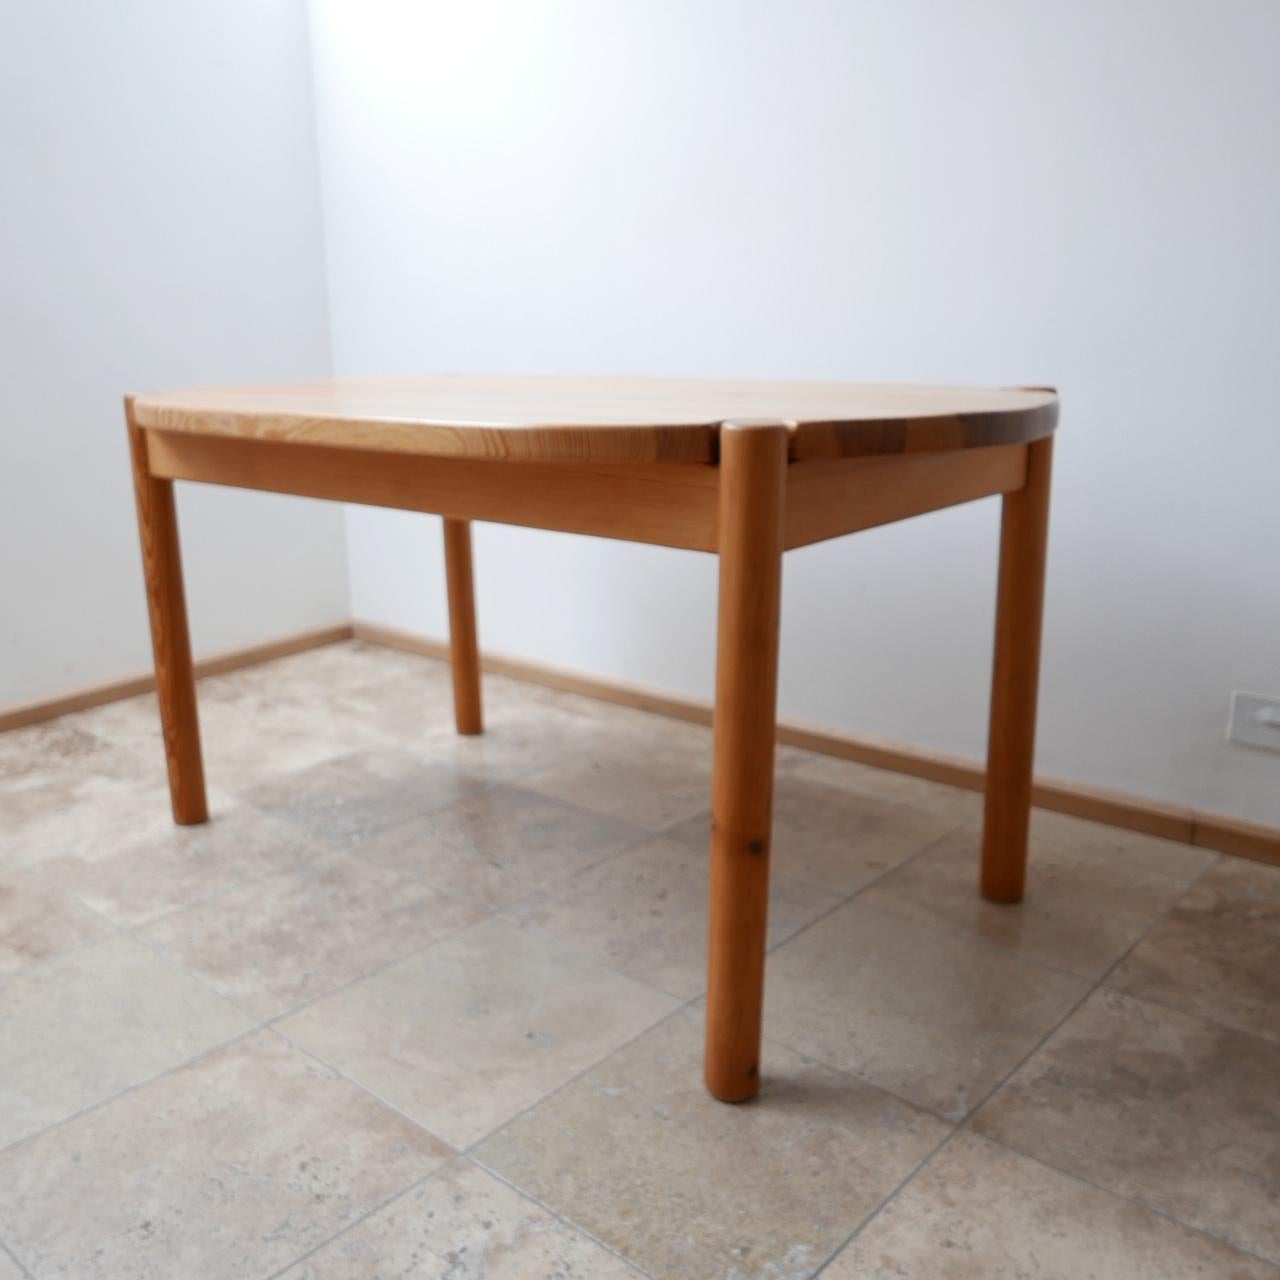 A dining table by Rainer Daumiller.

Solid pine.

circa 1970s, Denmark.

Ideal to be paired with the amazing Daumiller chairs which we have available separately.

Some surface wear and marks (see photos) but generally good condition. The top